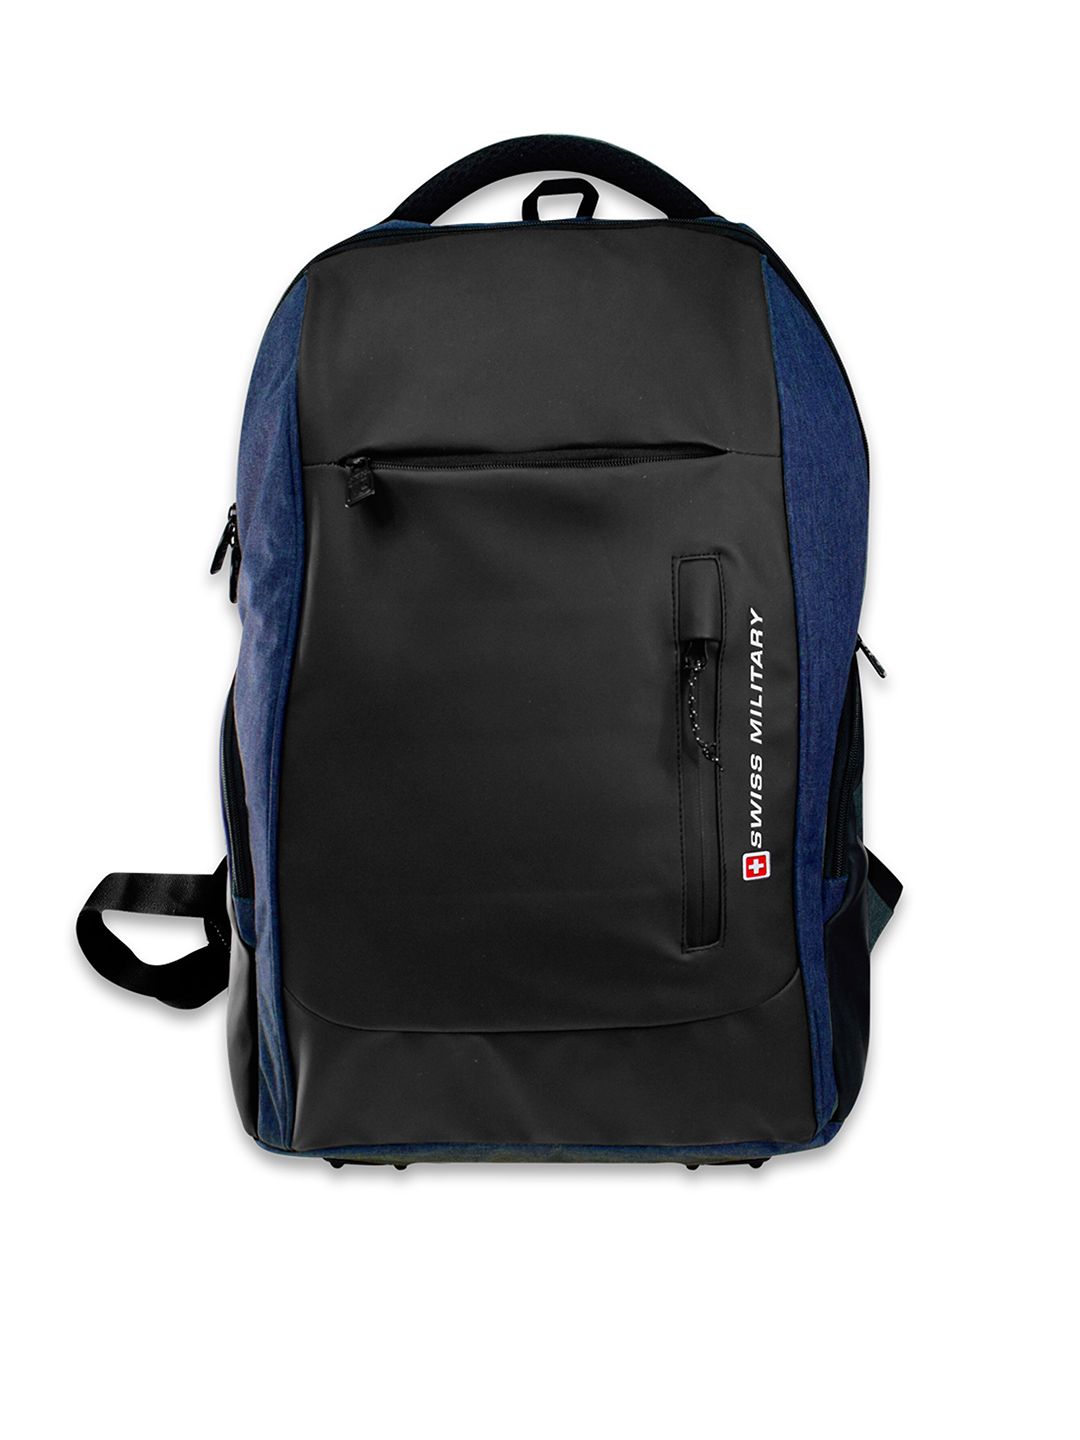 SWISS MILITARY Unisex Black & Blue Brand Logo Backpack with USB Charging Port Price in India